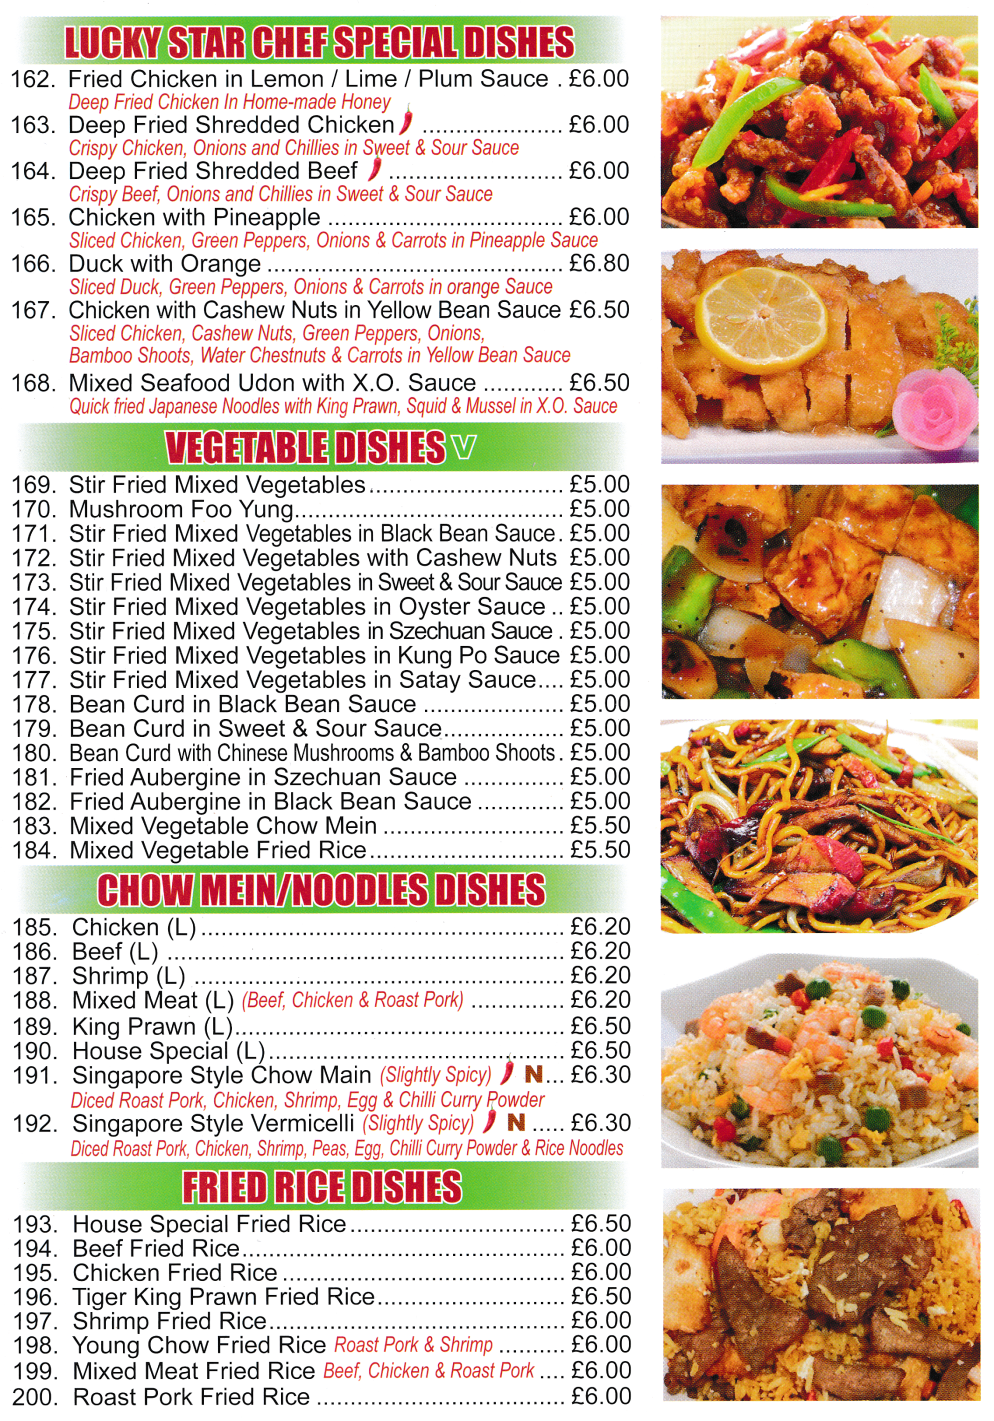 Menu for Lucky Star - Mixed Seafood UYdon with X.O. Sauce, Mushroom Foo Yung, Singapore Style Chow Mein, Deep Fried Shredded Beef, Beef Chow Mein..